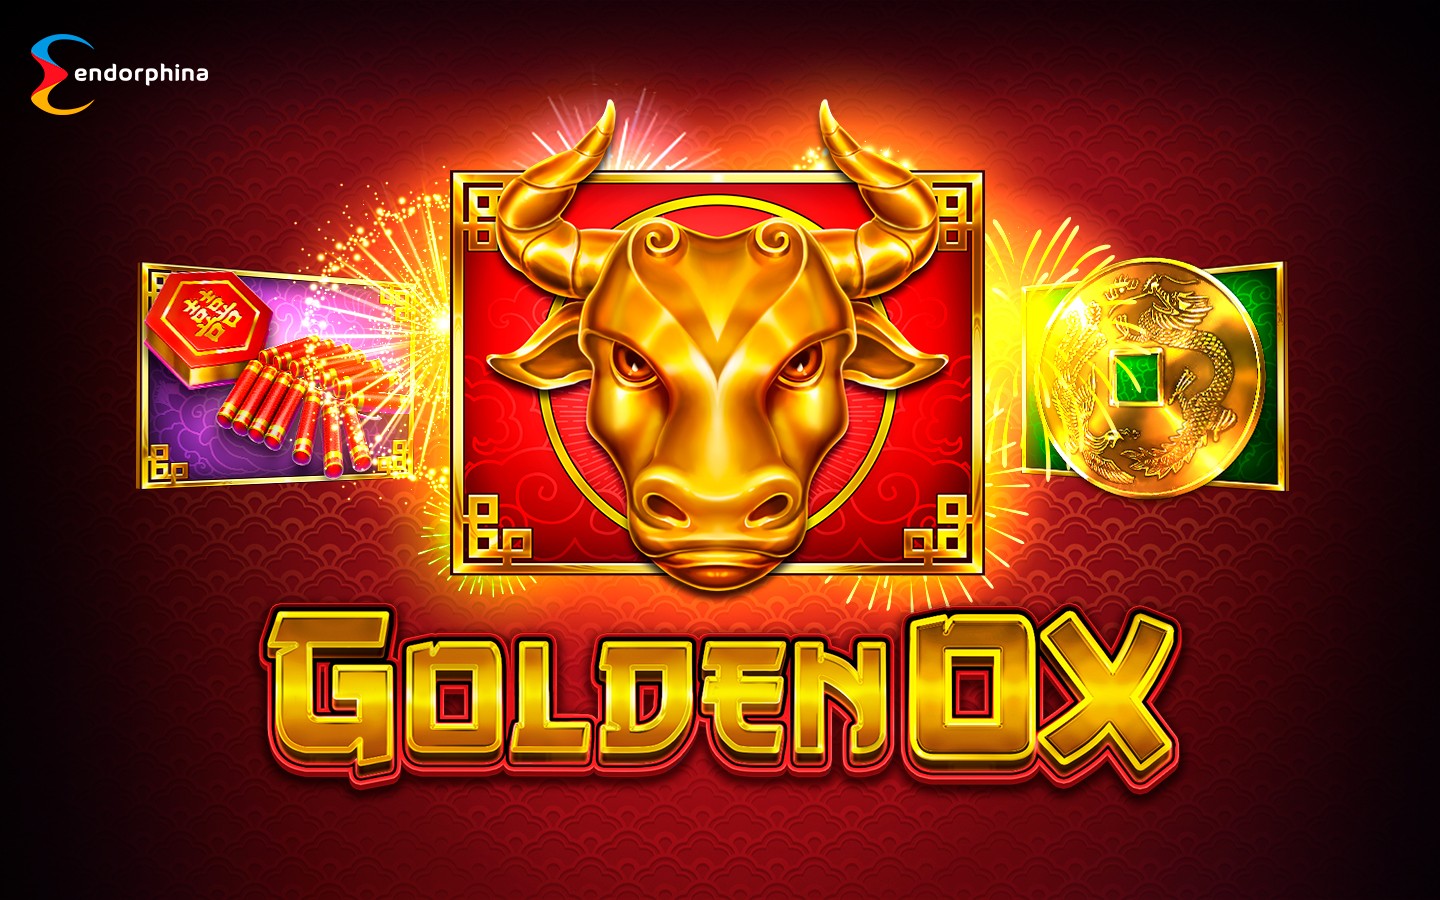 Golden Ox is the new slot title from Endorphina